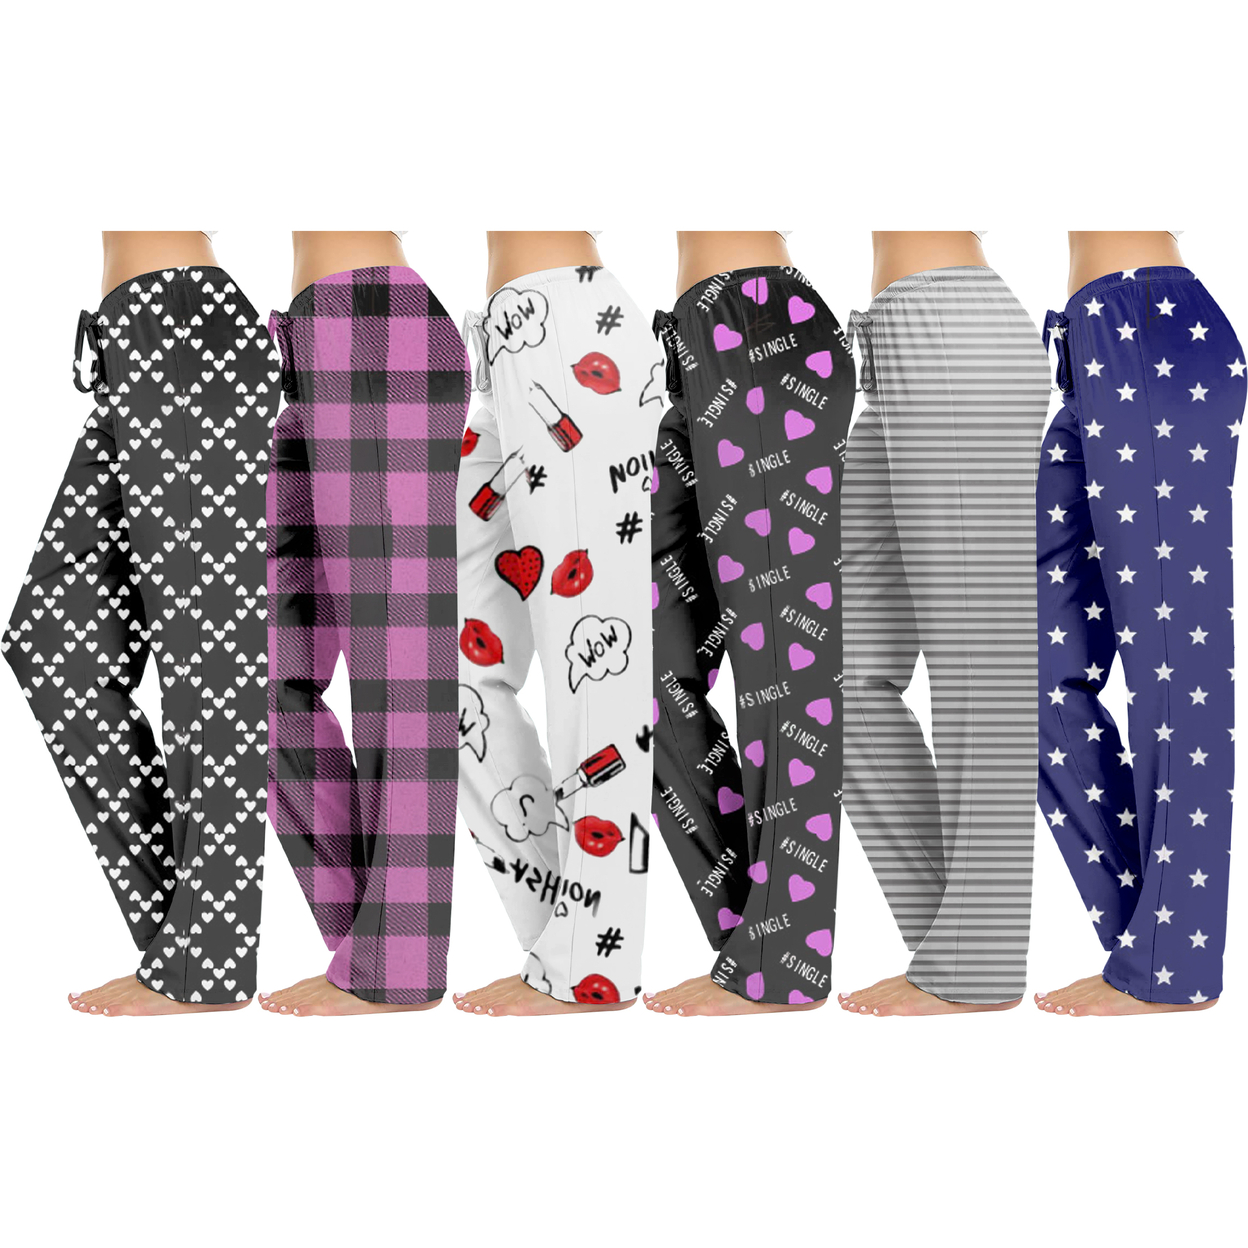 2-Pack: Women's Casual Fun Printed Lightweight Lounge Terry Knit Pajama Bottom Pants - Small, Love